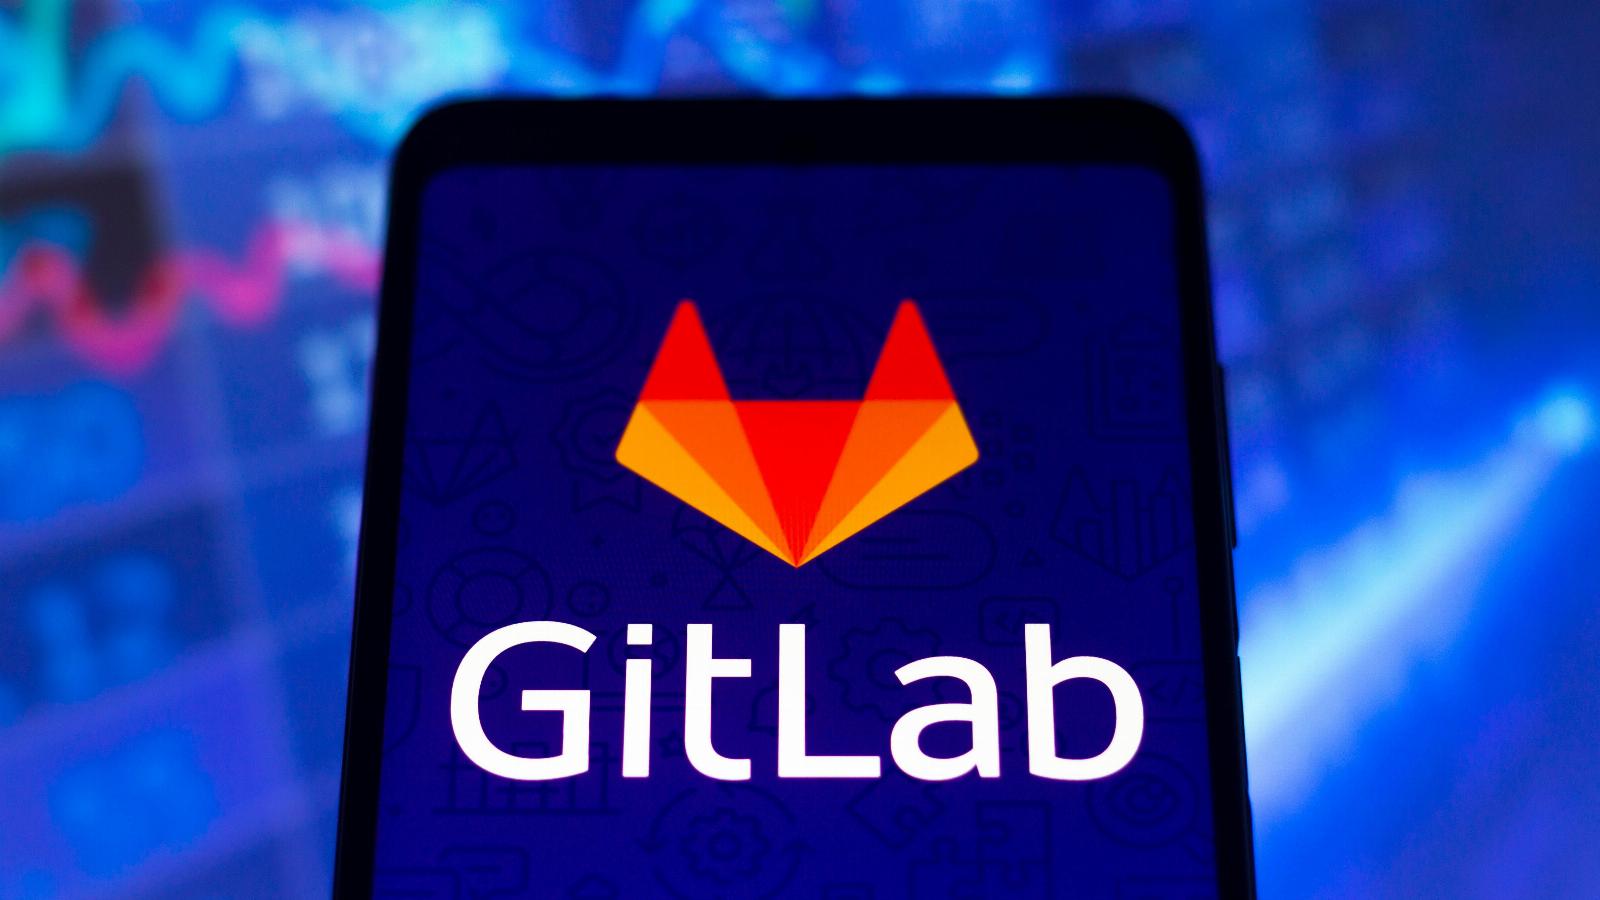 GitLab’s new security feature uses AI to explain vulnerabilities to developers